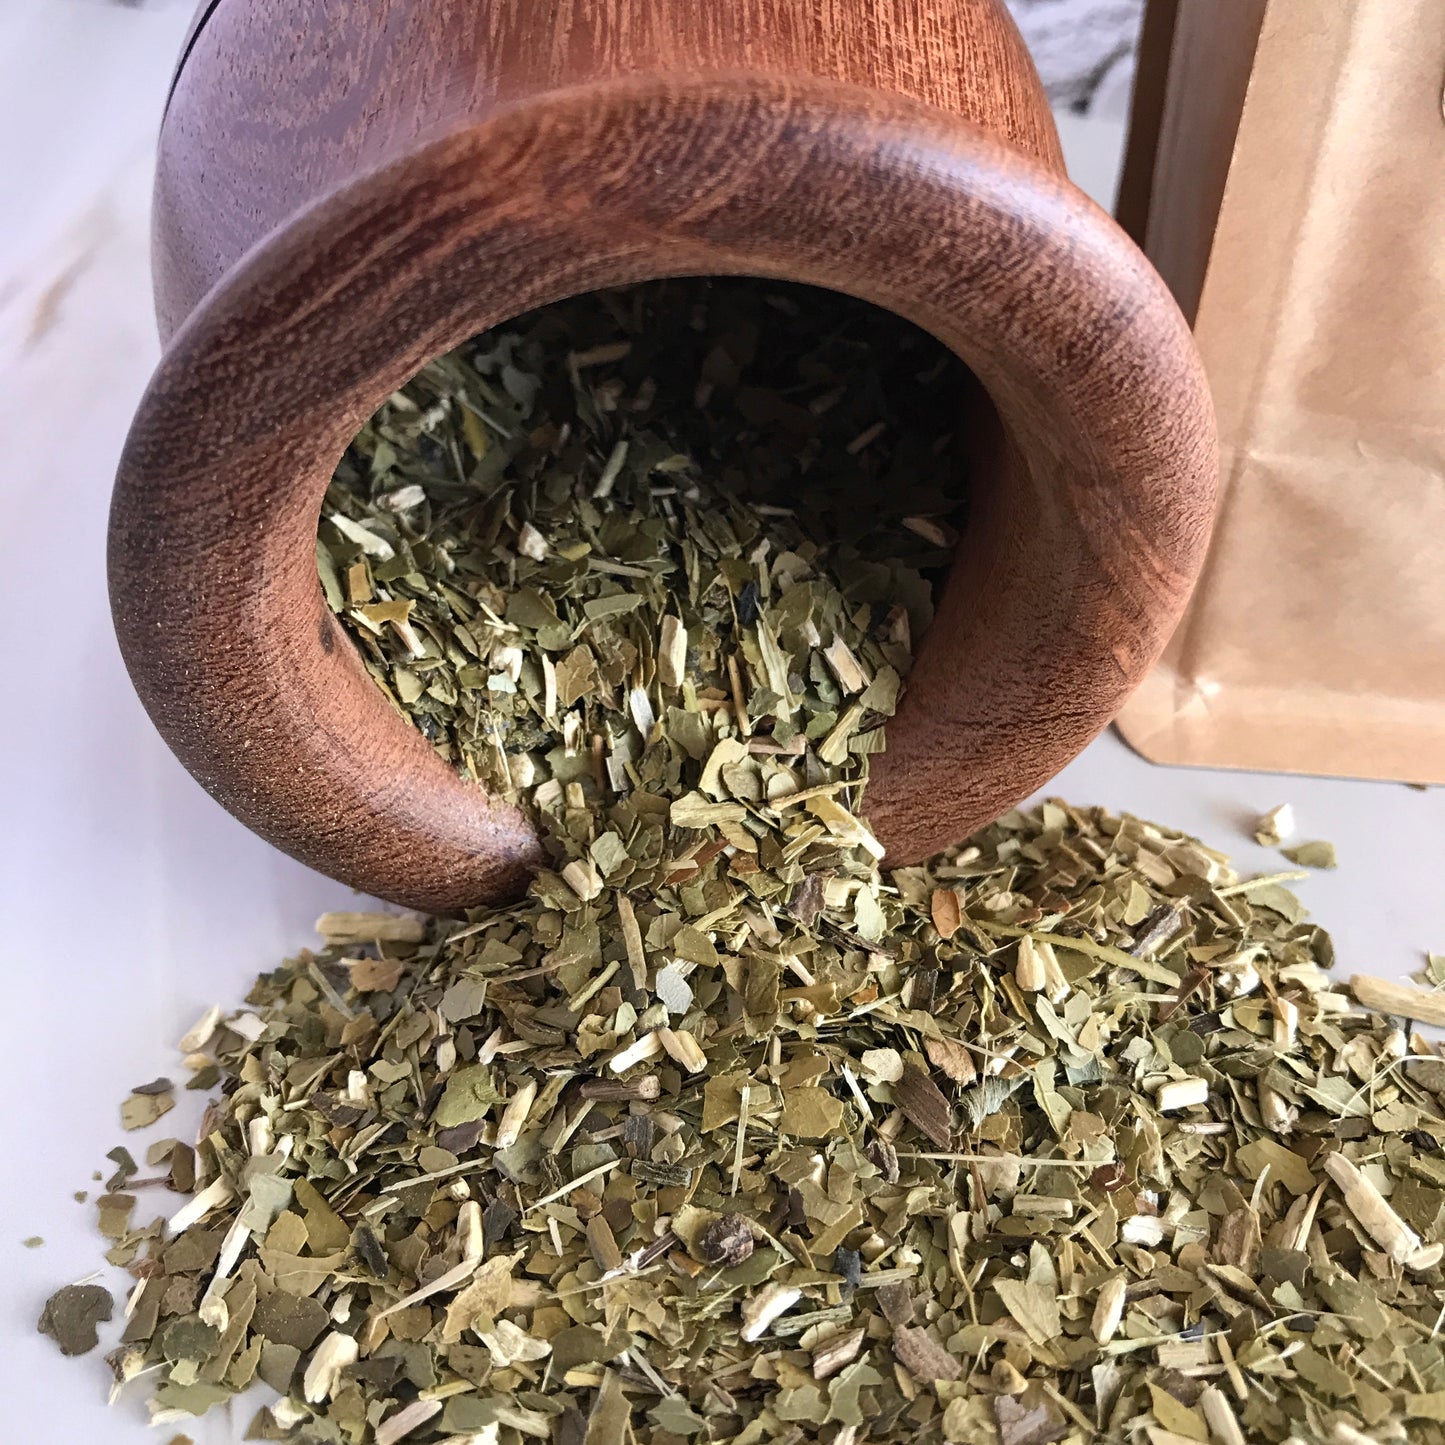 Matear ORGANIC Yerba Mate  WITH STEMS CON PALO -NEW WEIGHT: 2 LBS PACKS